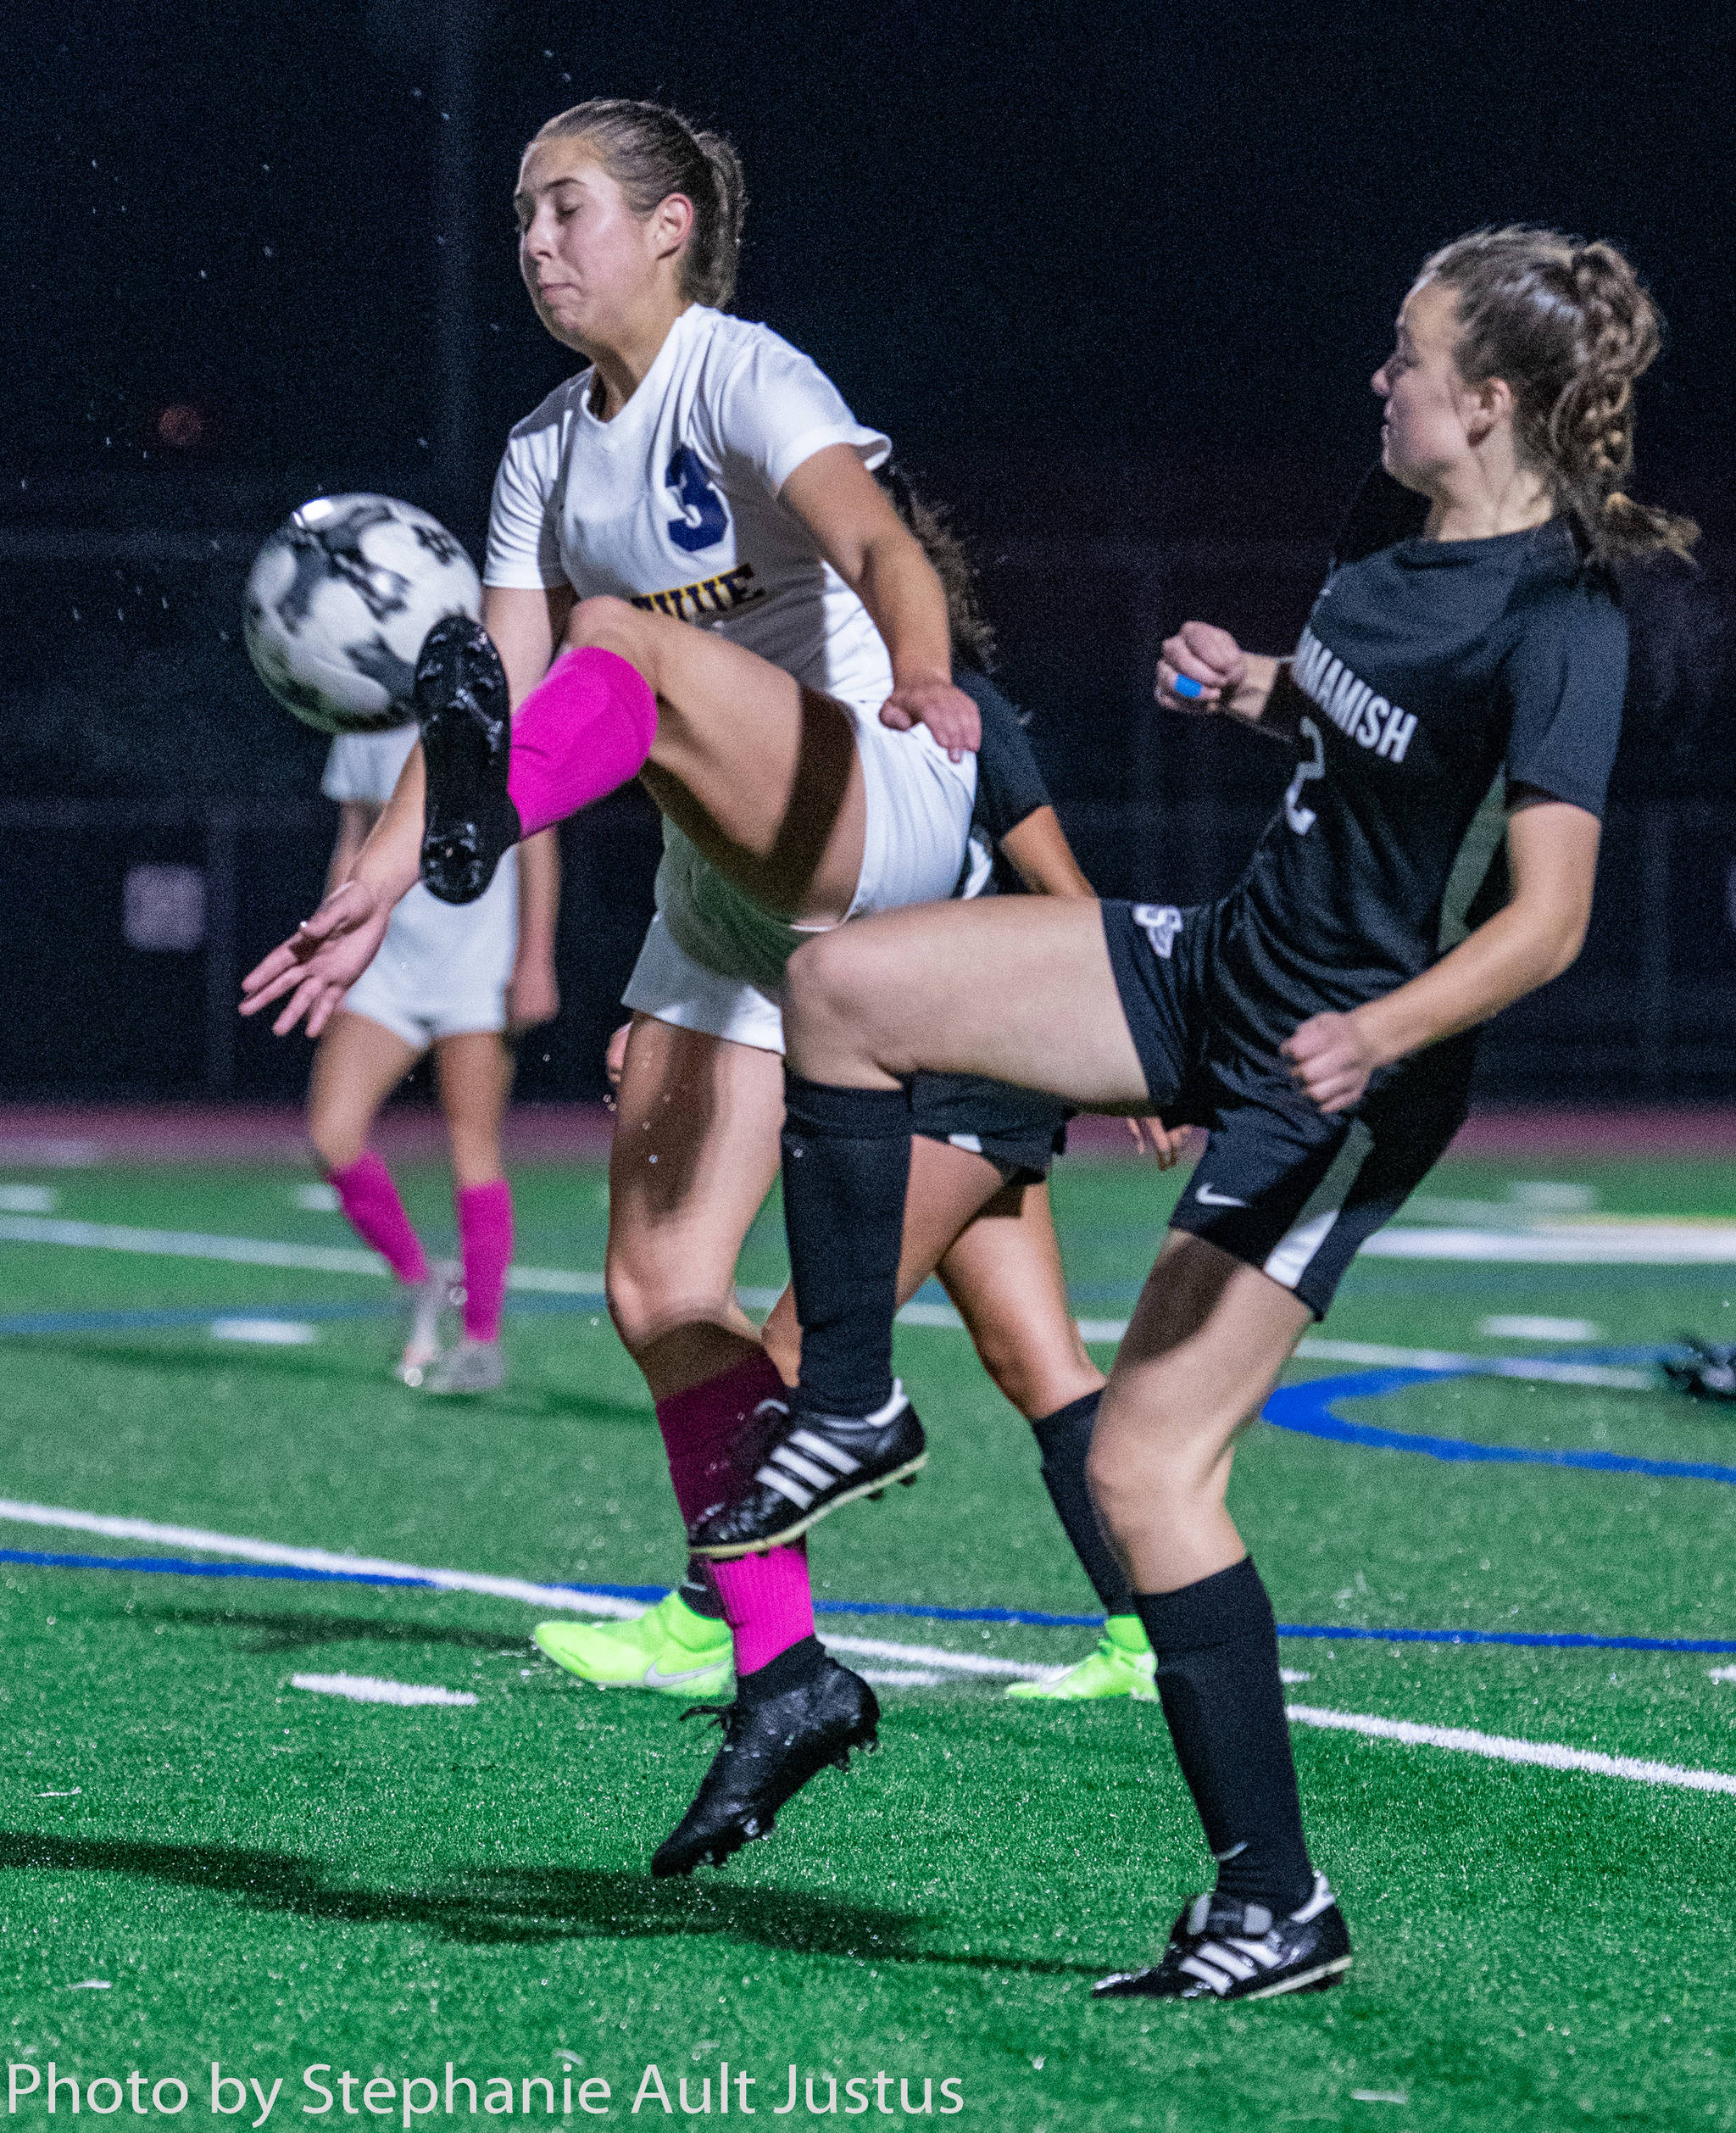 Bellevue senior Courtney Serres (left) and Sammamish senior Ema Hackett (right) go for a ball during the Totems 2-1 loss to the Wolverines. Photo courtesy of Stephanie Ault Justus